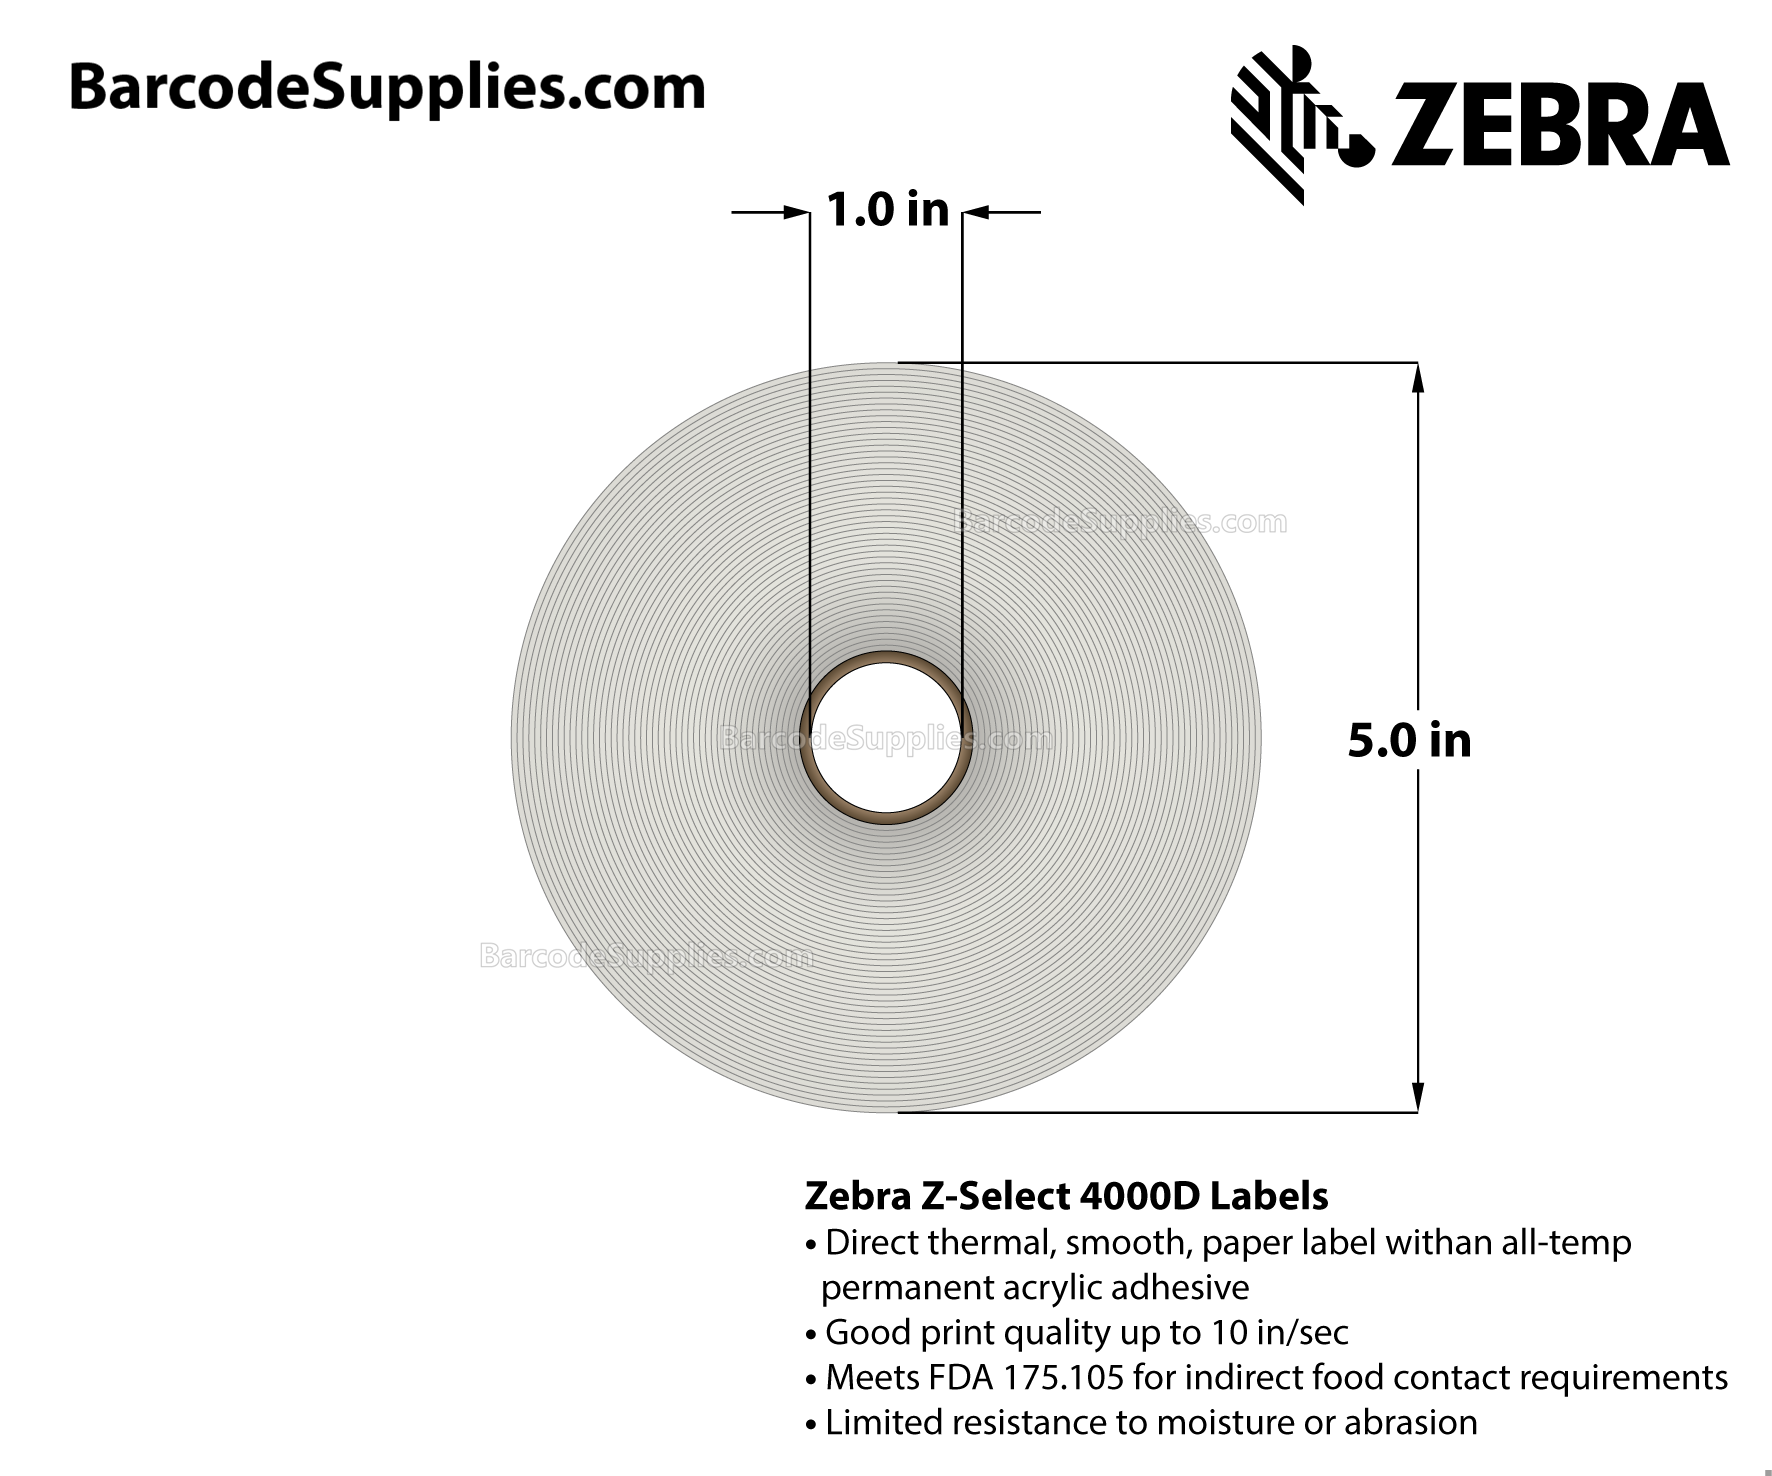 2.25 x 3 Direct Thermal White Z-Select 4000D Labels With All-Temp Adhesive - Perforated - 840 Labels Per Roll - Carton Of 6 Rolls - 5040 Labels Total - MPN: 10010042